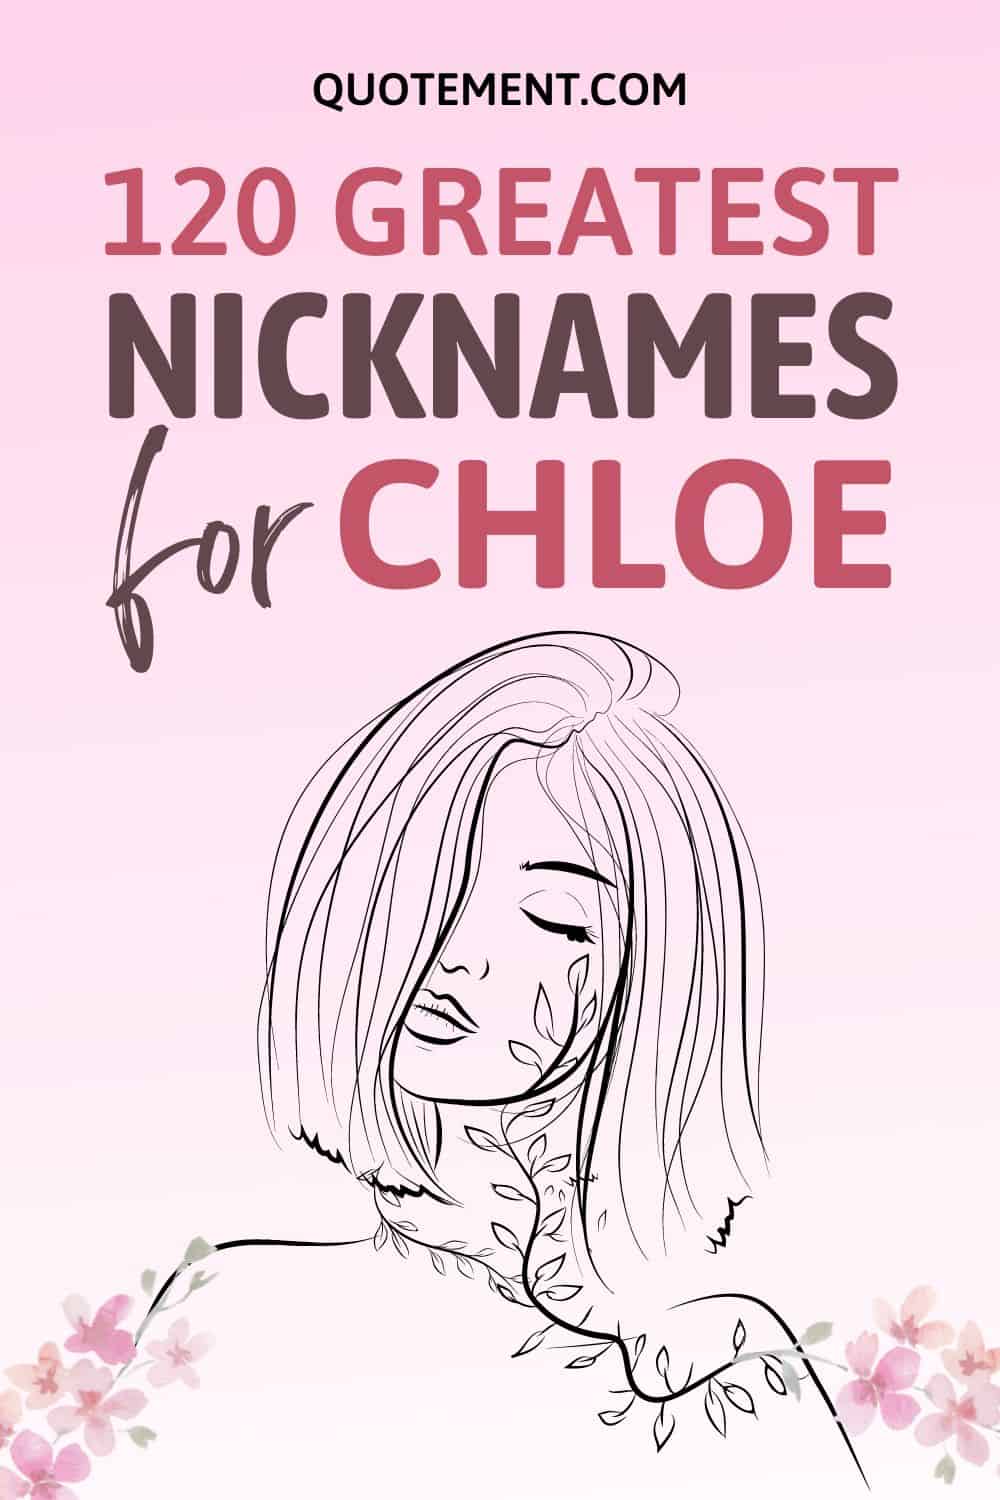 120 Extraordinary Nicknames For Chloe You're Gonna Love
